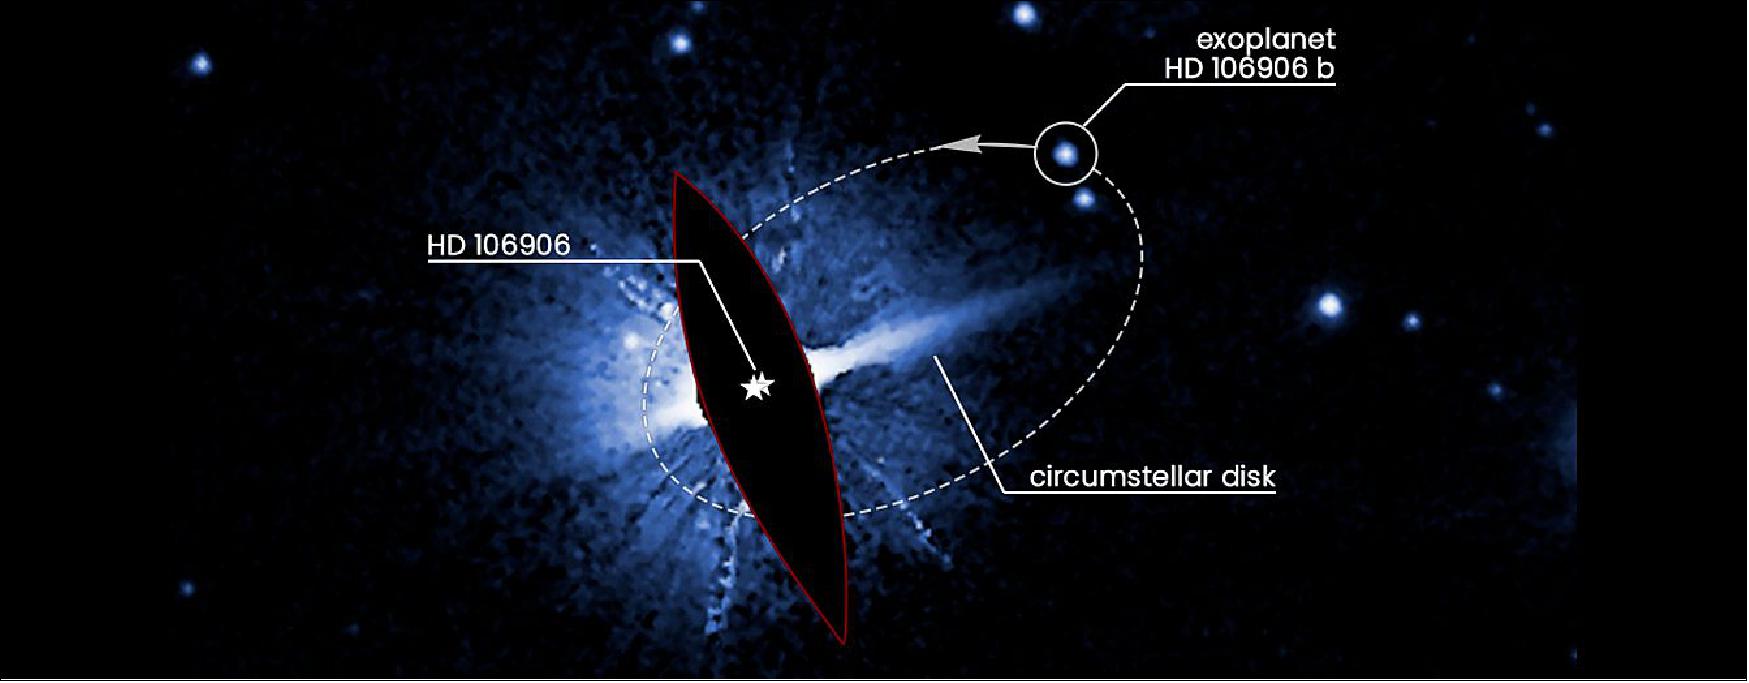 Figure 4: This Hubble Space Telescope image shows one possible orbit (dashed ellipse) of the 11-Jupiter-mass exoplanet HD 106906 b. This remote world is widely separated from its host stars, whose brilliant light is masked here to allow the planet to be seen. The planet resides outside its system's circumstellar debris disk, which is akin to our own Kuiper Belt of small, icy bodies beyond Neptune. The disk itself is asymmetric and distorted, perhaps due to the gravitational tug of the wayward planet. Other points of light in the image are background stars [image credit: NASA/ESA, M. Nguyen (University of California, Berkeley), R. De Rosa (European Southern Observatory), and P. Kalas (University of California, Berkeley and SETI Institute)]